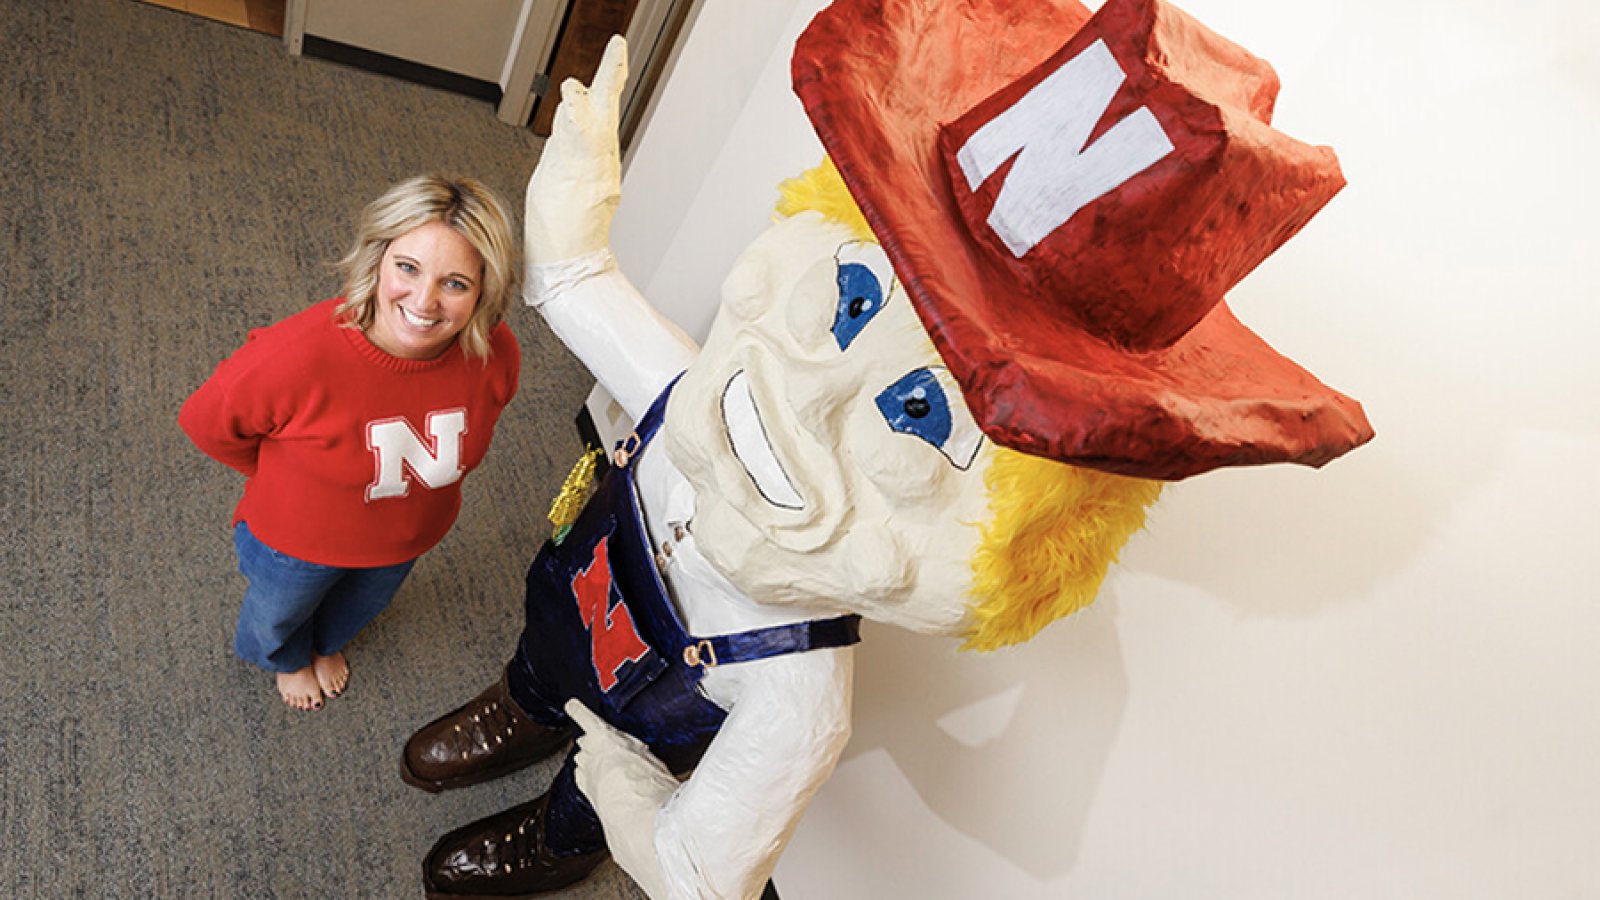 Ashley Dohe, administrative coordinator for Electrical and Computer Engineering, has make an 8-foot tall Herbie Husker from papier mâché. She hopes to auction it off to help veterans. (Craig Chandler / University Communication and Marketing)